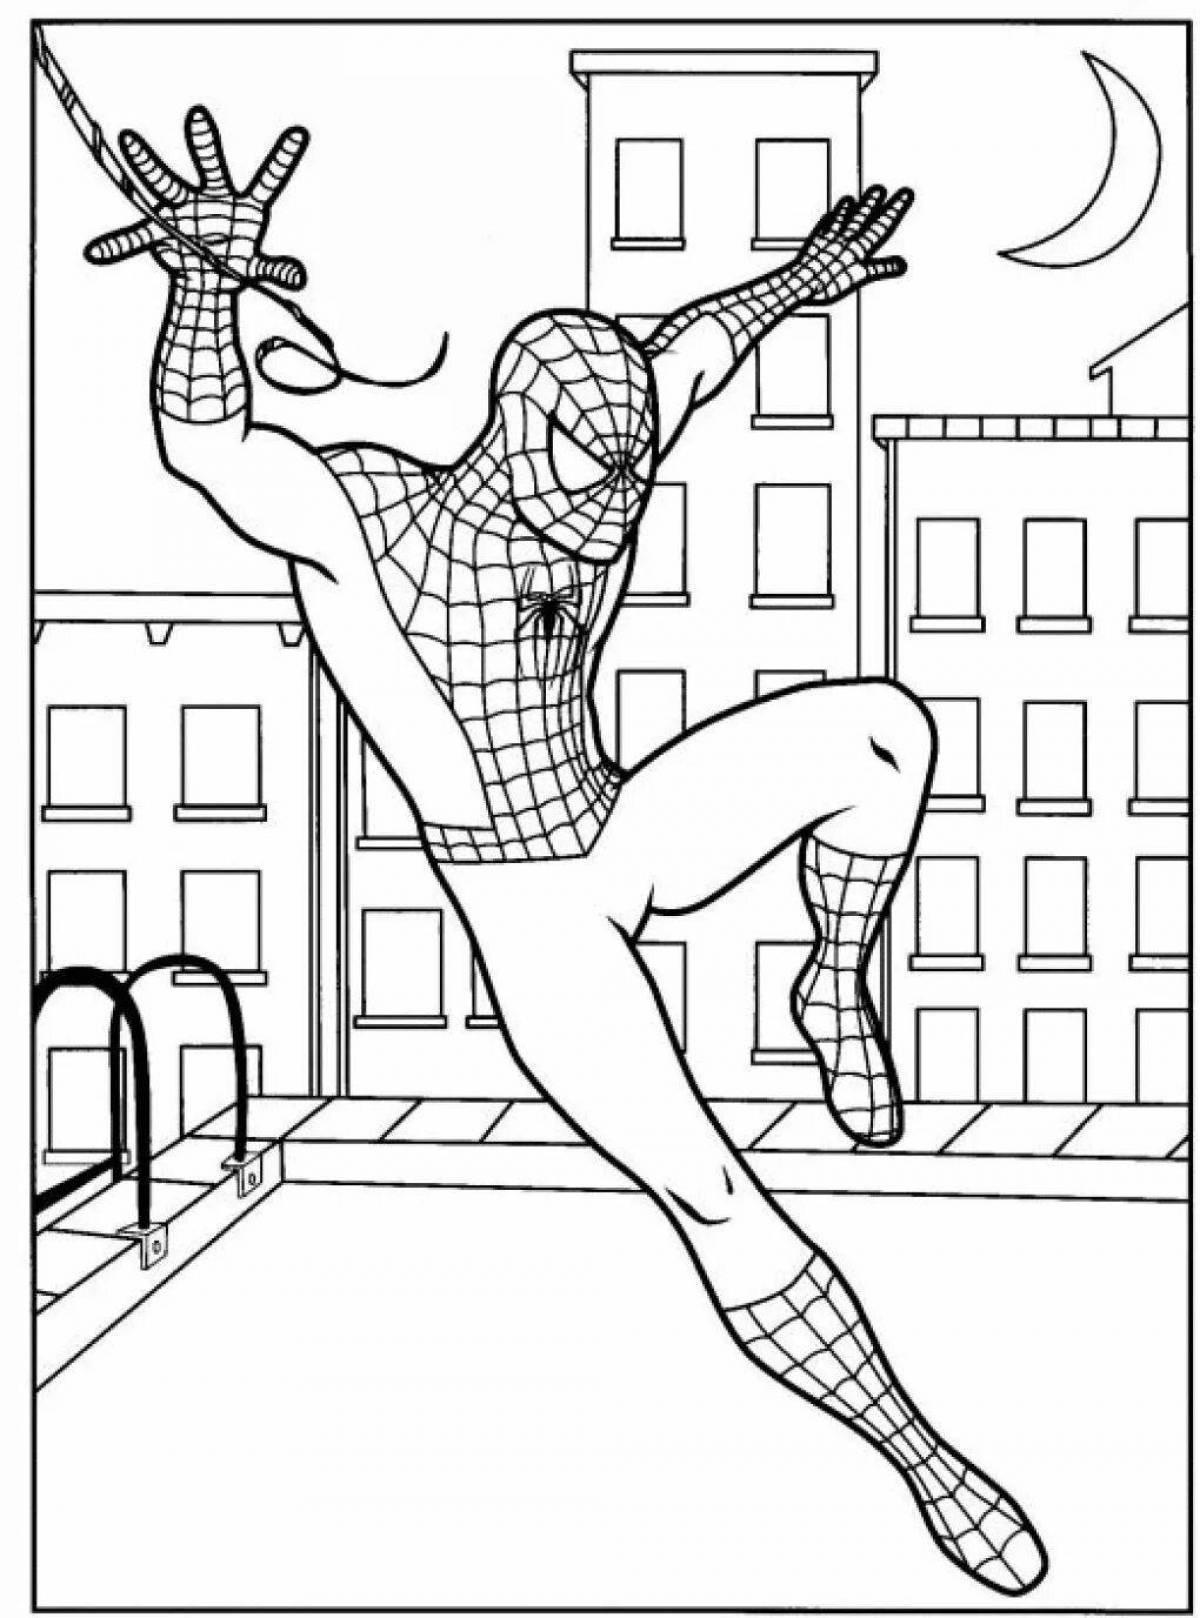 Colorful spiderman coloring book for kids